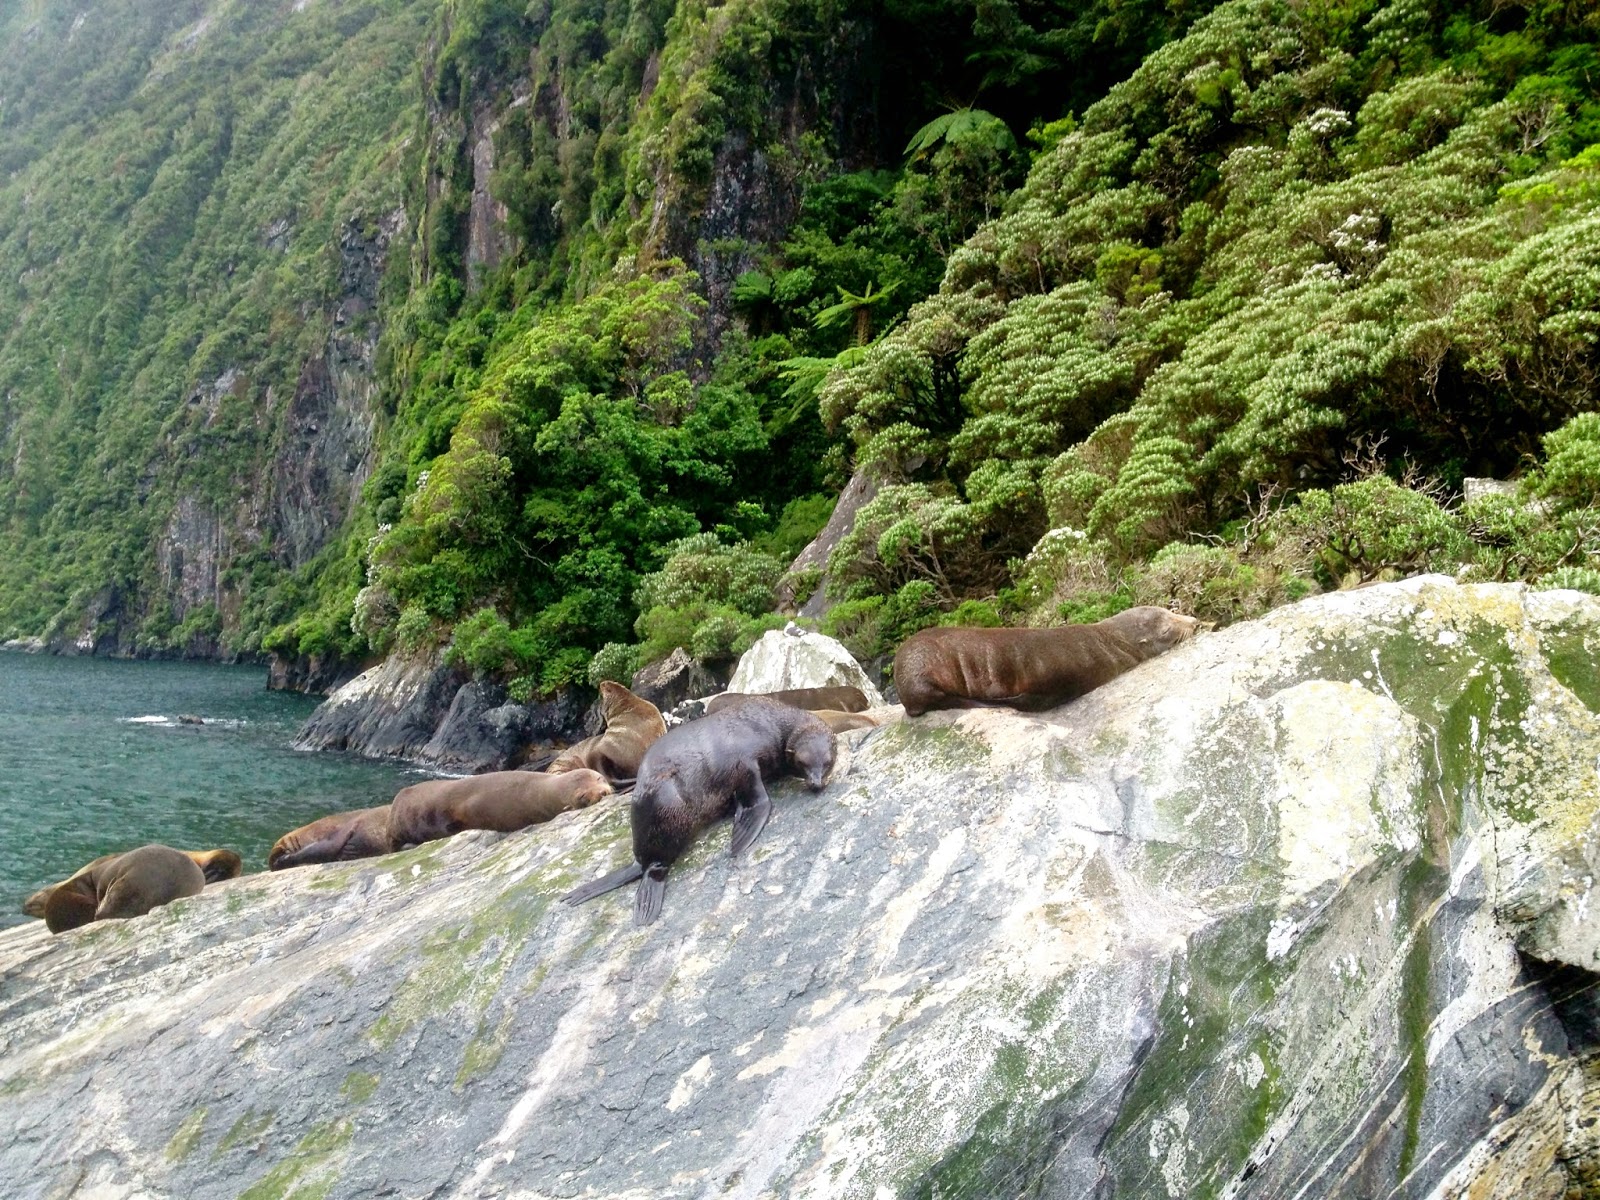 Seals in the Milford Sound, Fjordland, New Zealand